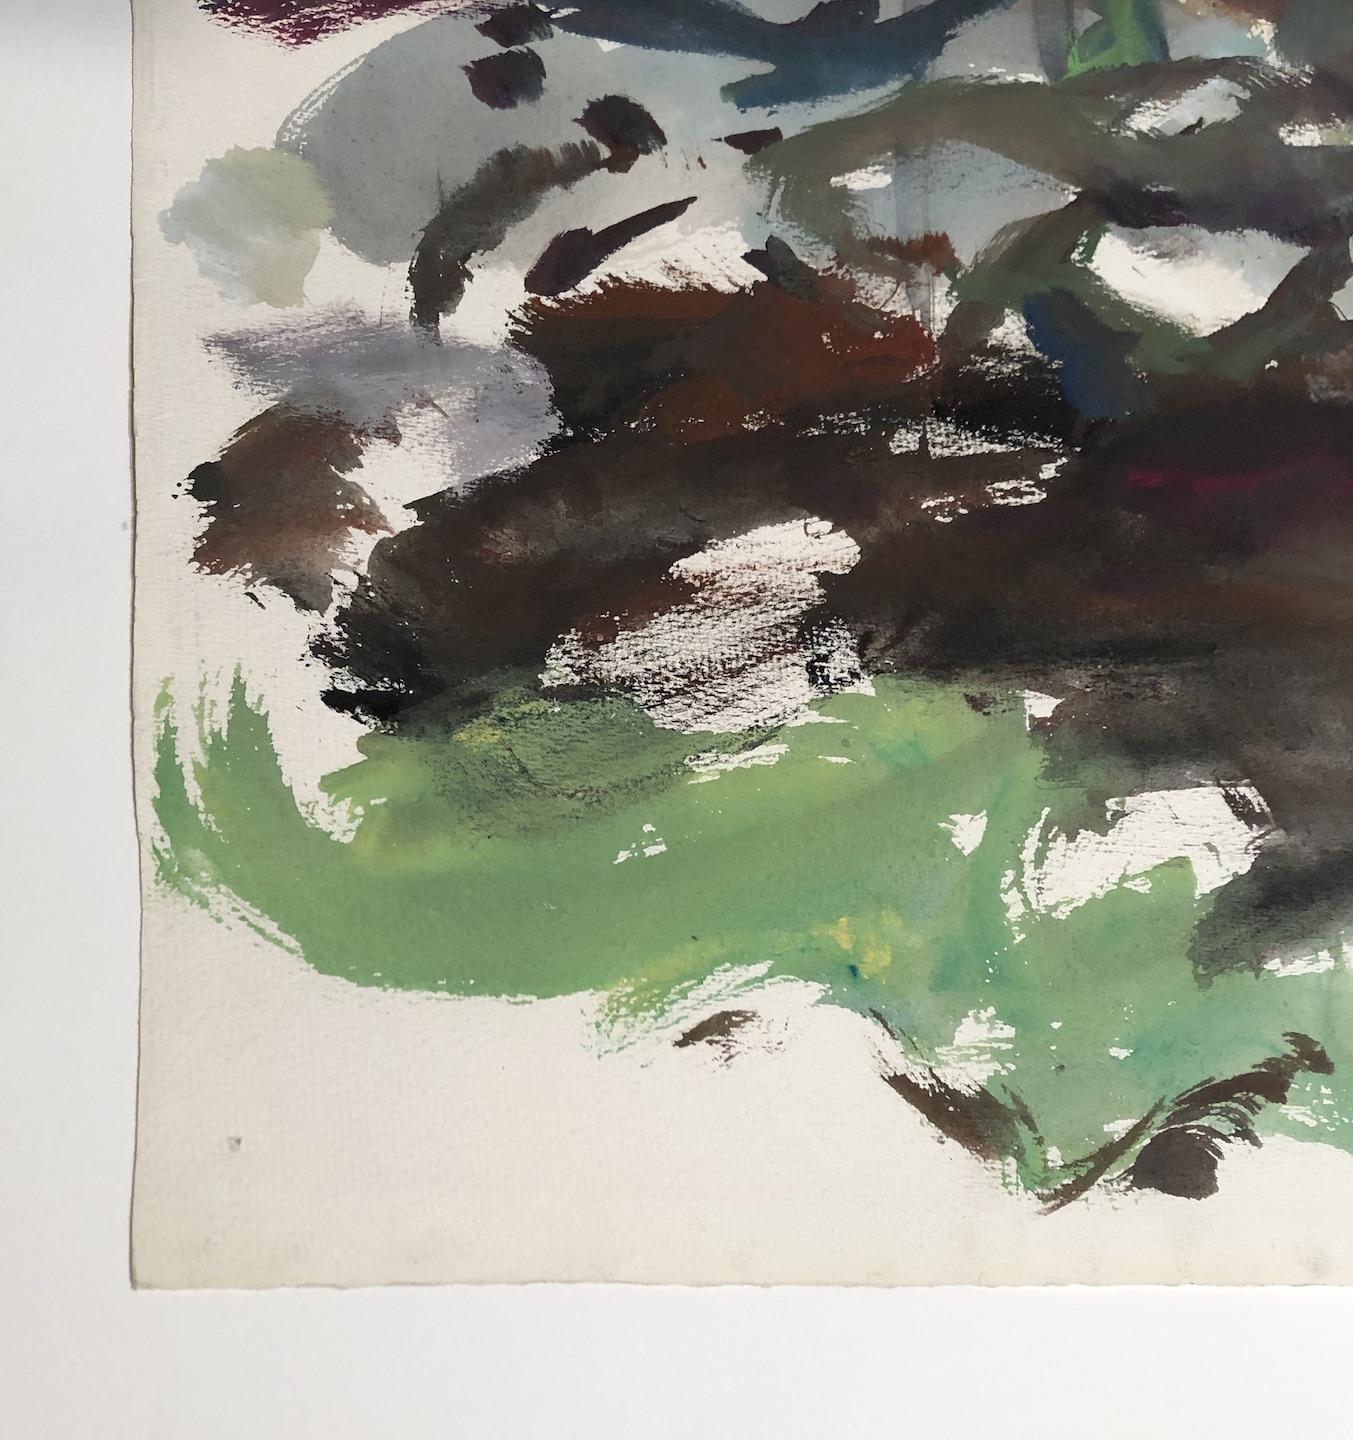 Elaine De Kooning, best known for her gestural abstract paintings that reference subjects as diverse as Greek Mythology to landscapes to Paleolithic cave paintings, was associated with the New York School and Abstract Expressionism. This watercolor